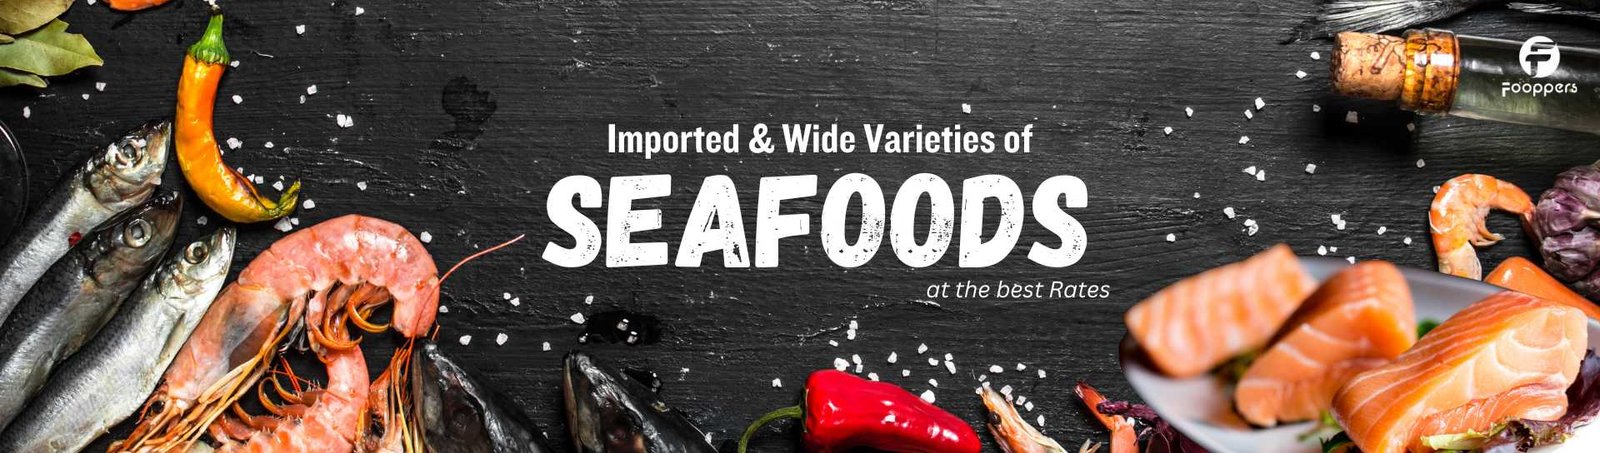 seafoods in Guwahati, best seafoods in Guwahati, seafoods home delivery in Guwahati